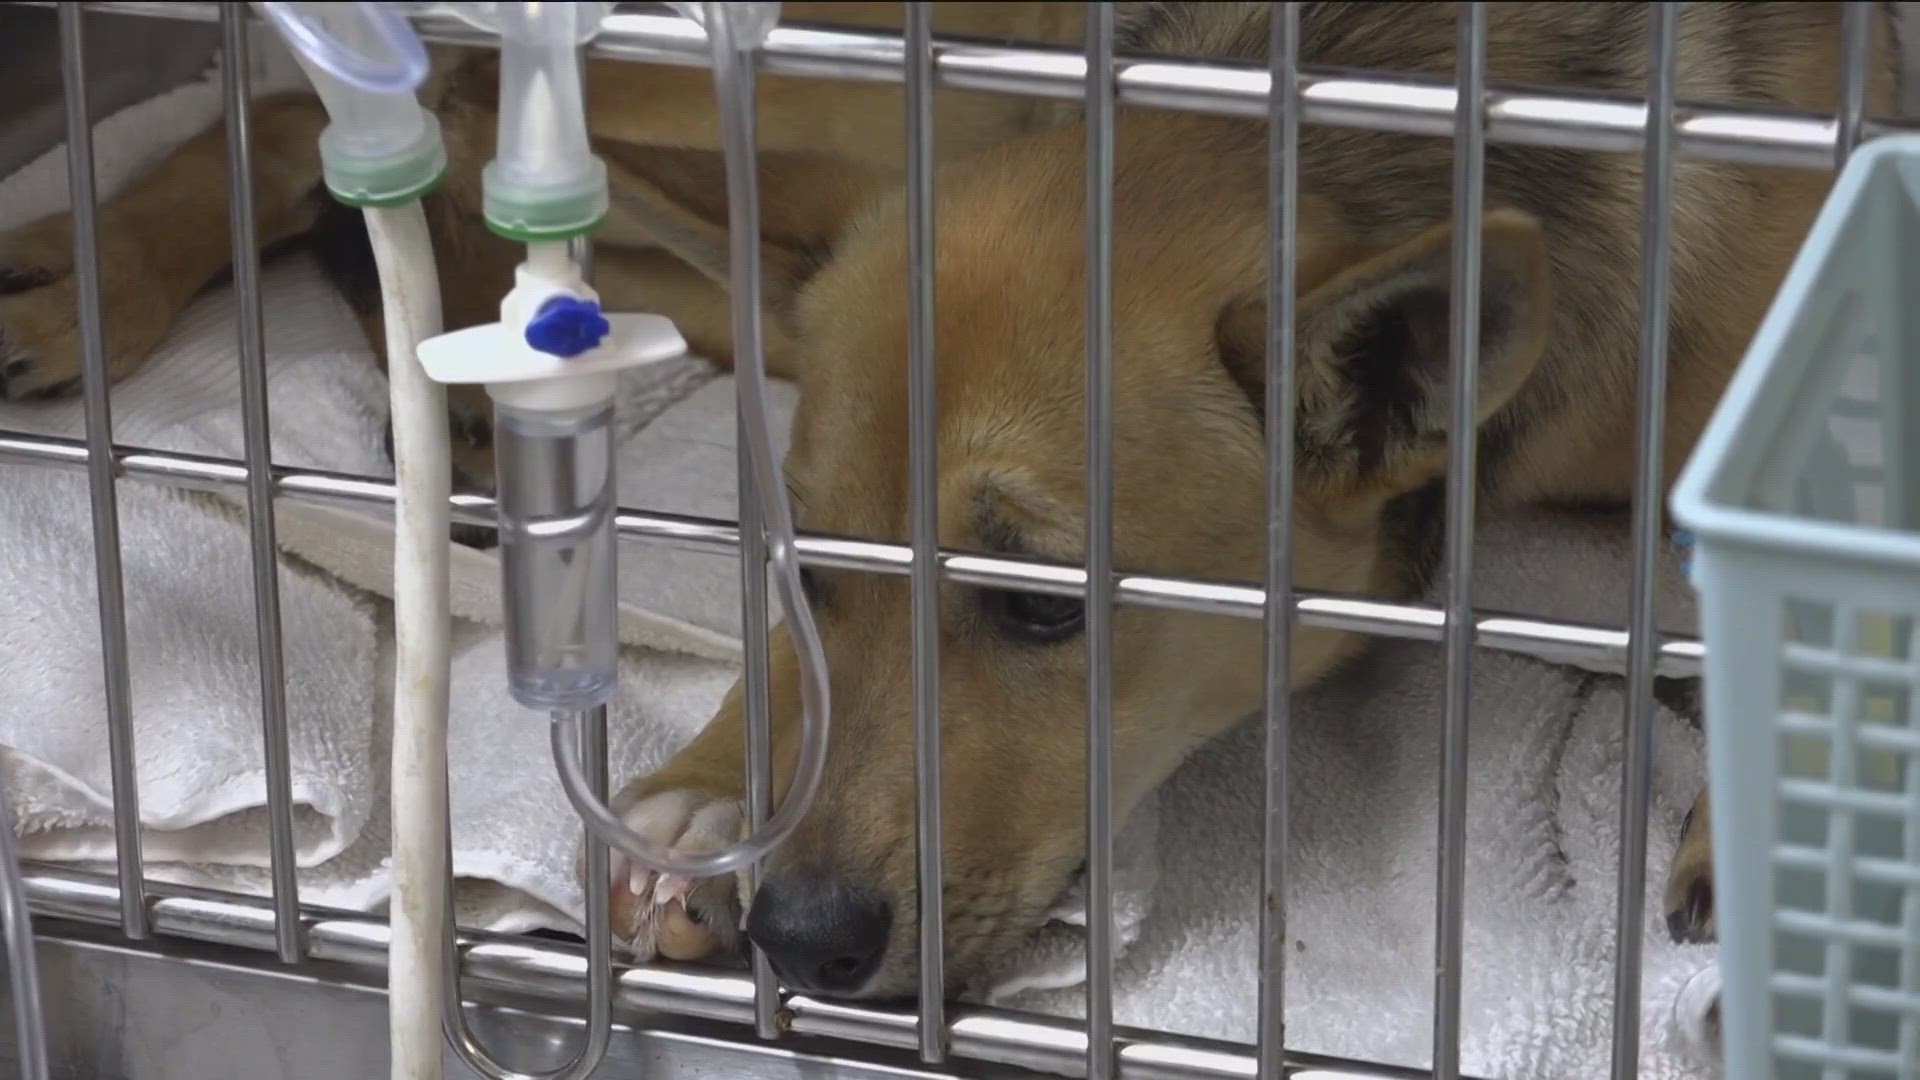 Under current Texas law, low-income pet owners are forced to surrender their pet to the shelter if they want to receive medical care.